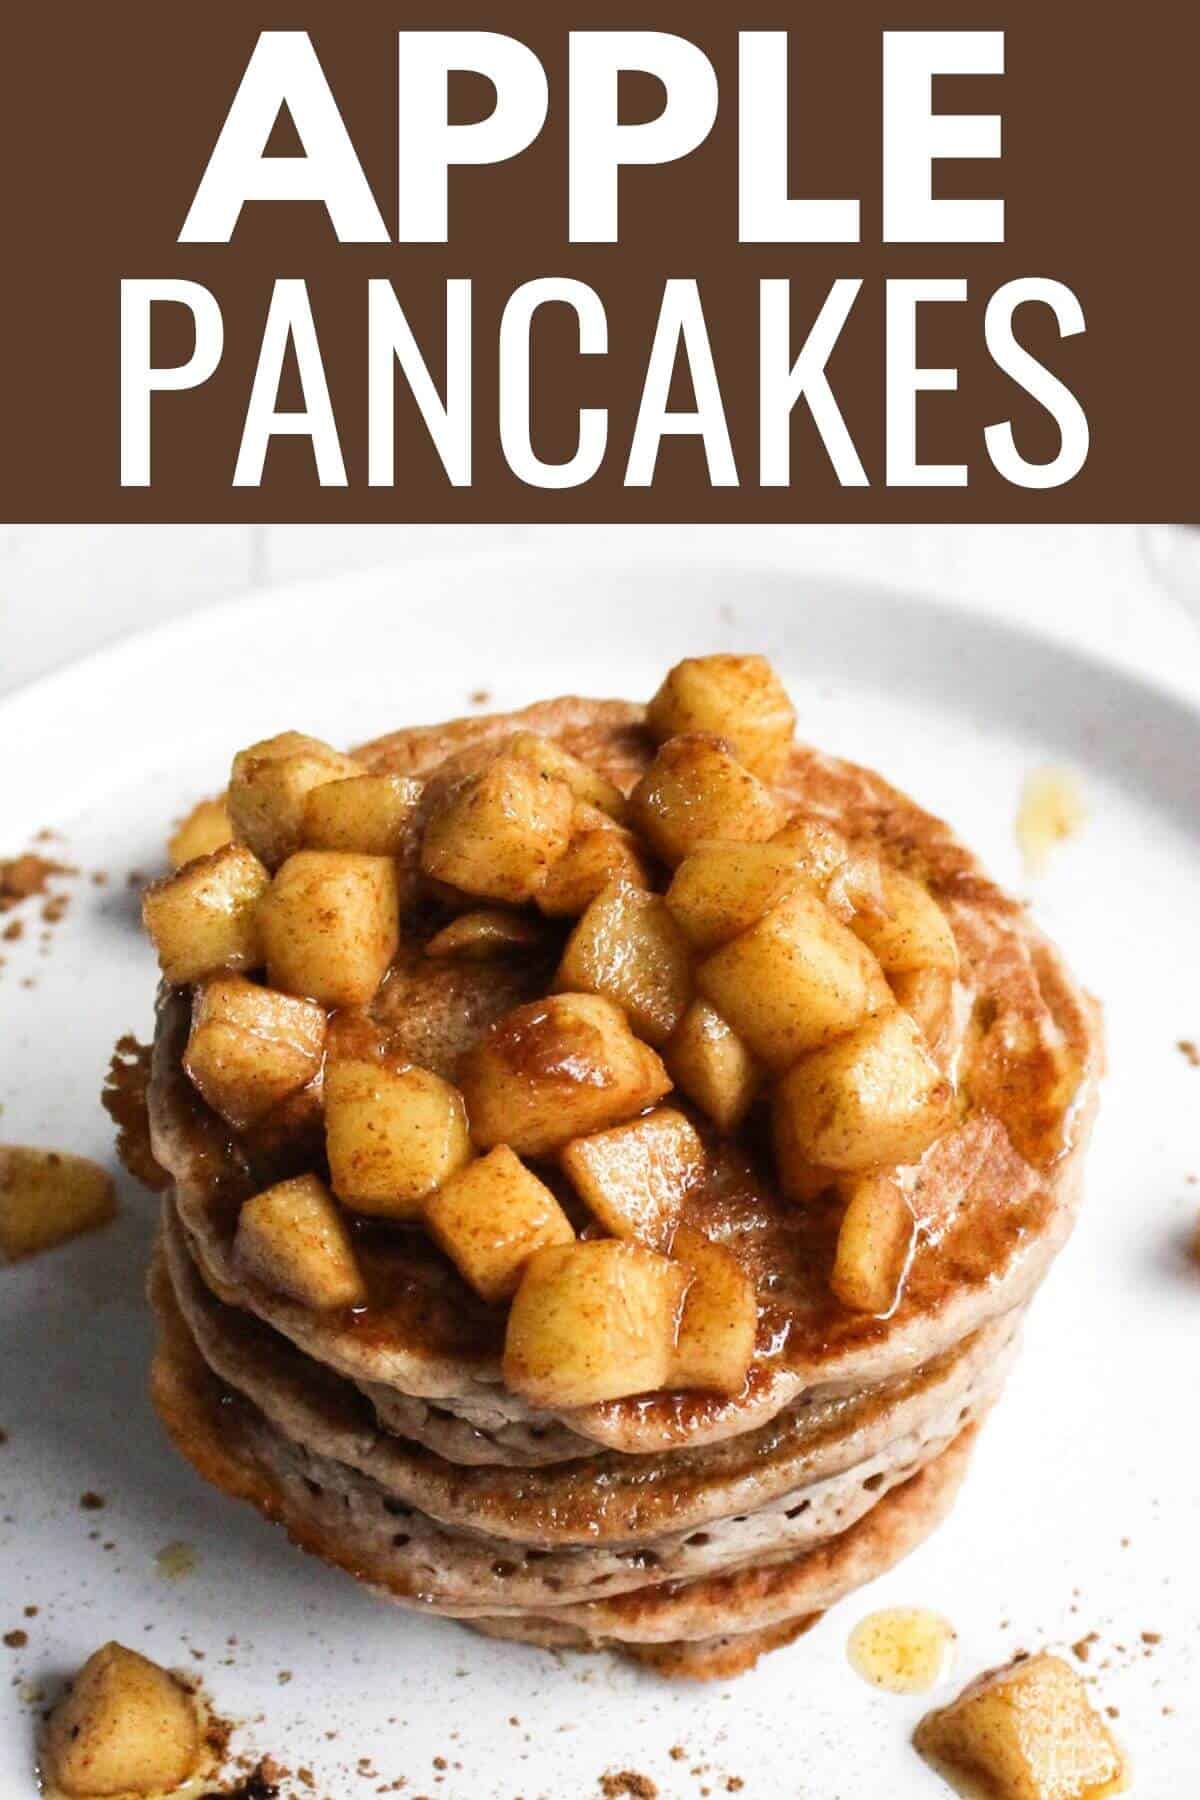 Apple pancakes with title text overlay.